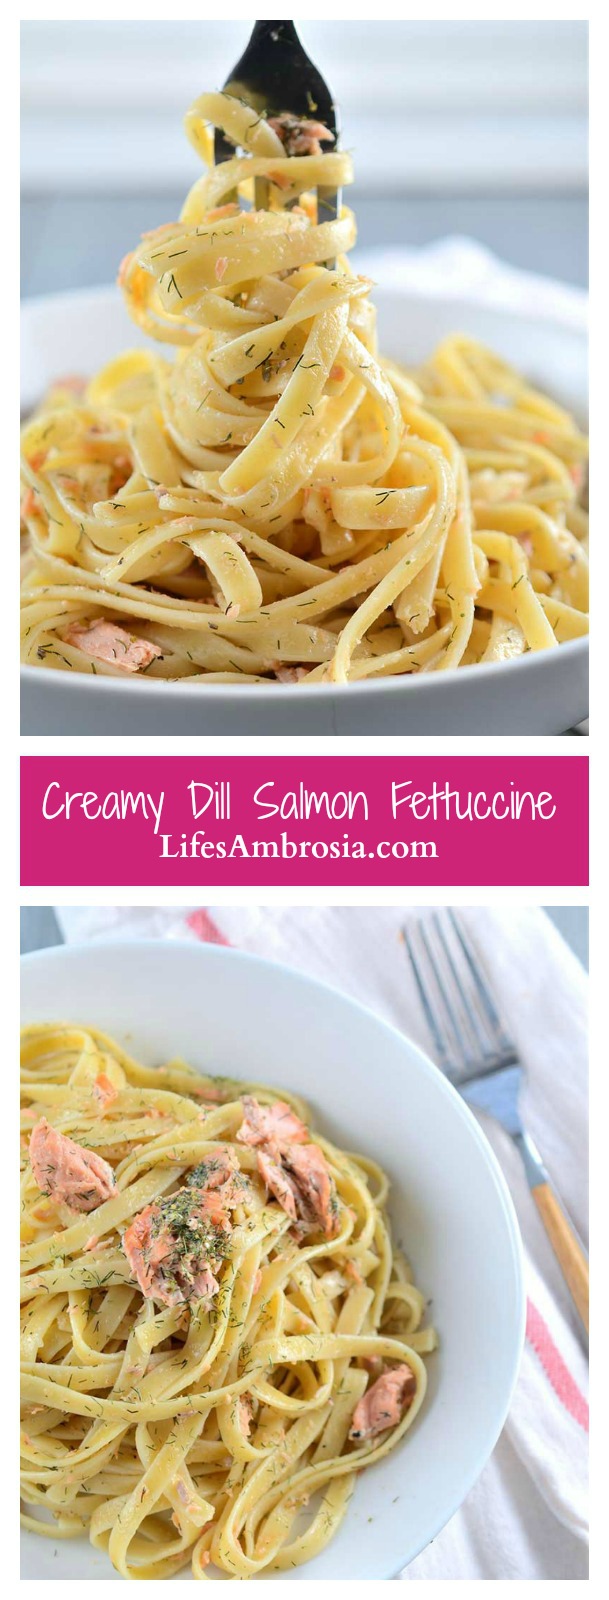 Creamy Dill Salmon Fettuccine made with salmon and white wine cream sauce is quick enough for a weeknight dinner and fancy enough for a date night at home.